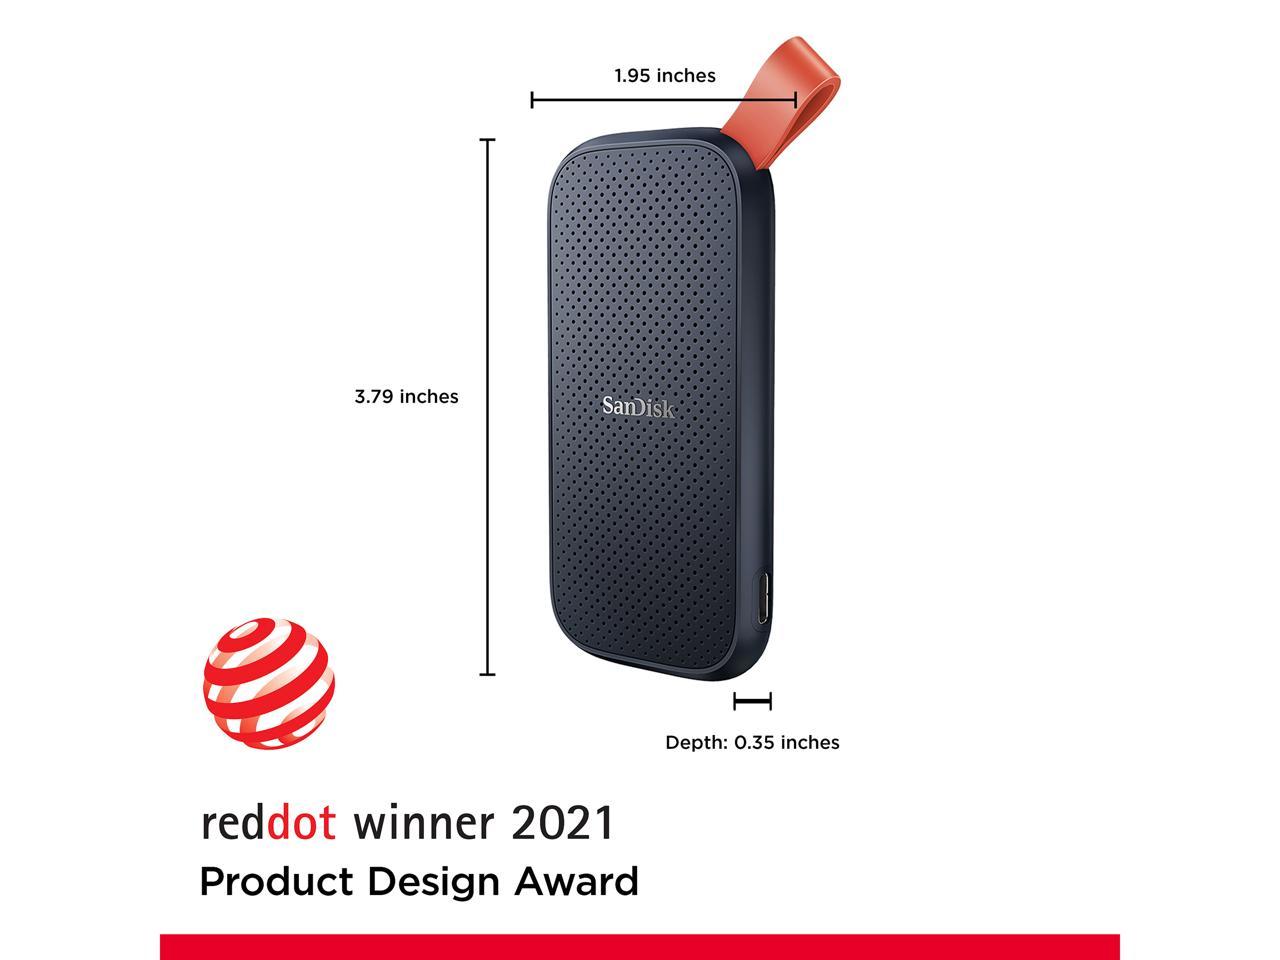 2TB SanDisk E30 Portable Solid State Drive SSD $131 + Free Shipping